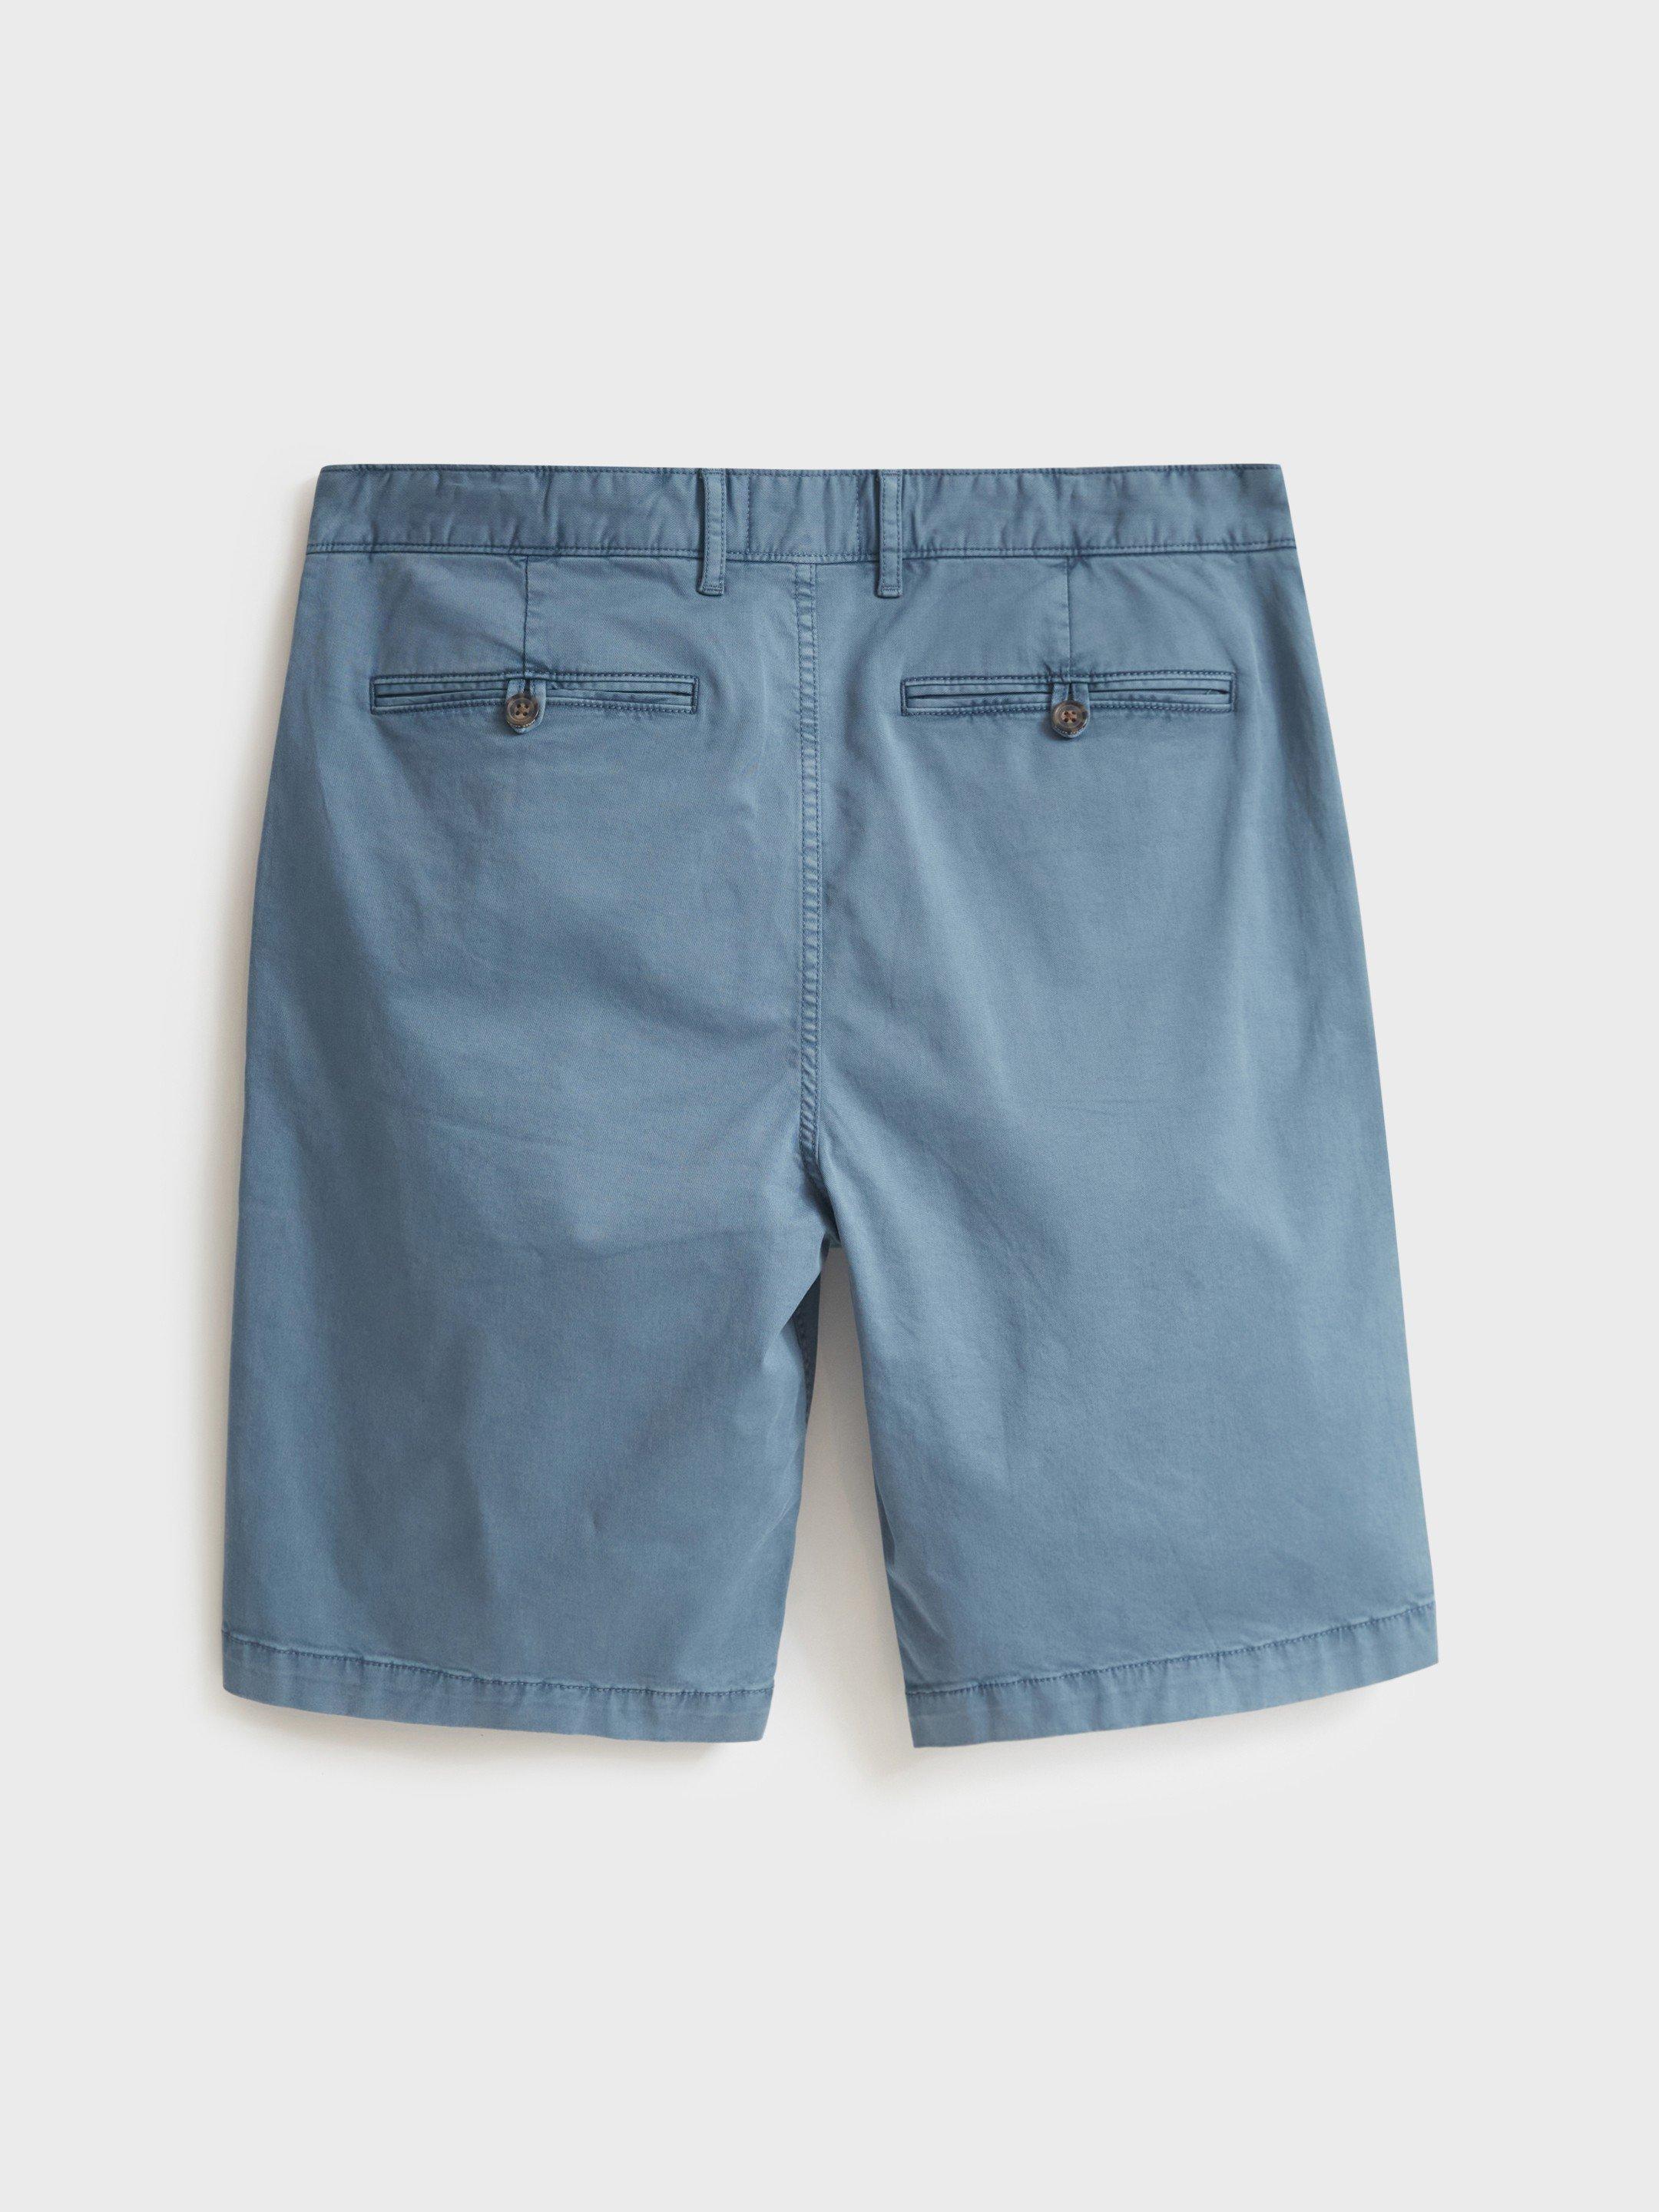 Sutton Organic Chino Shorts in MID BLUE - FLAT BACK